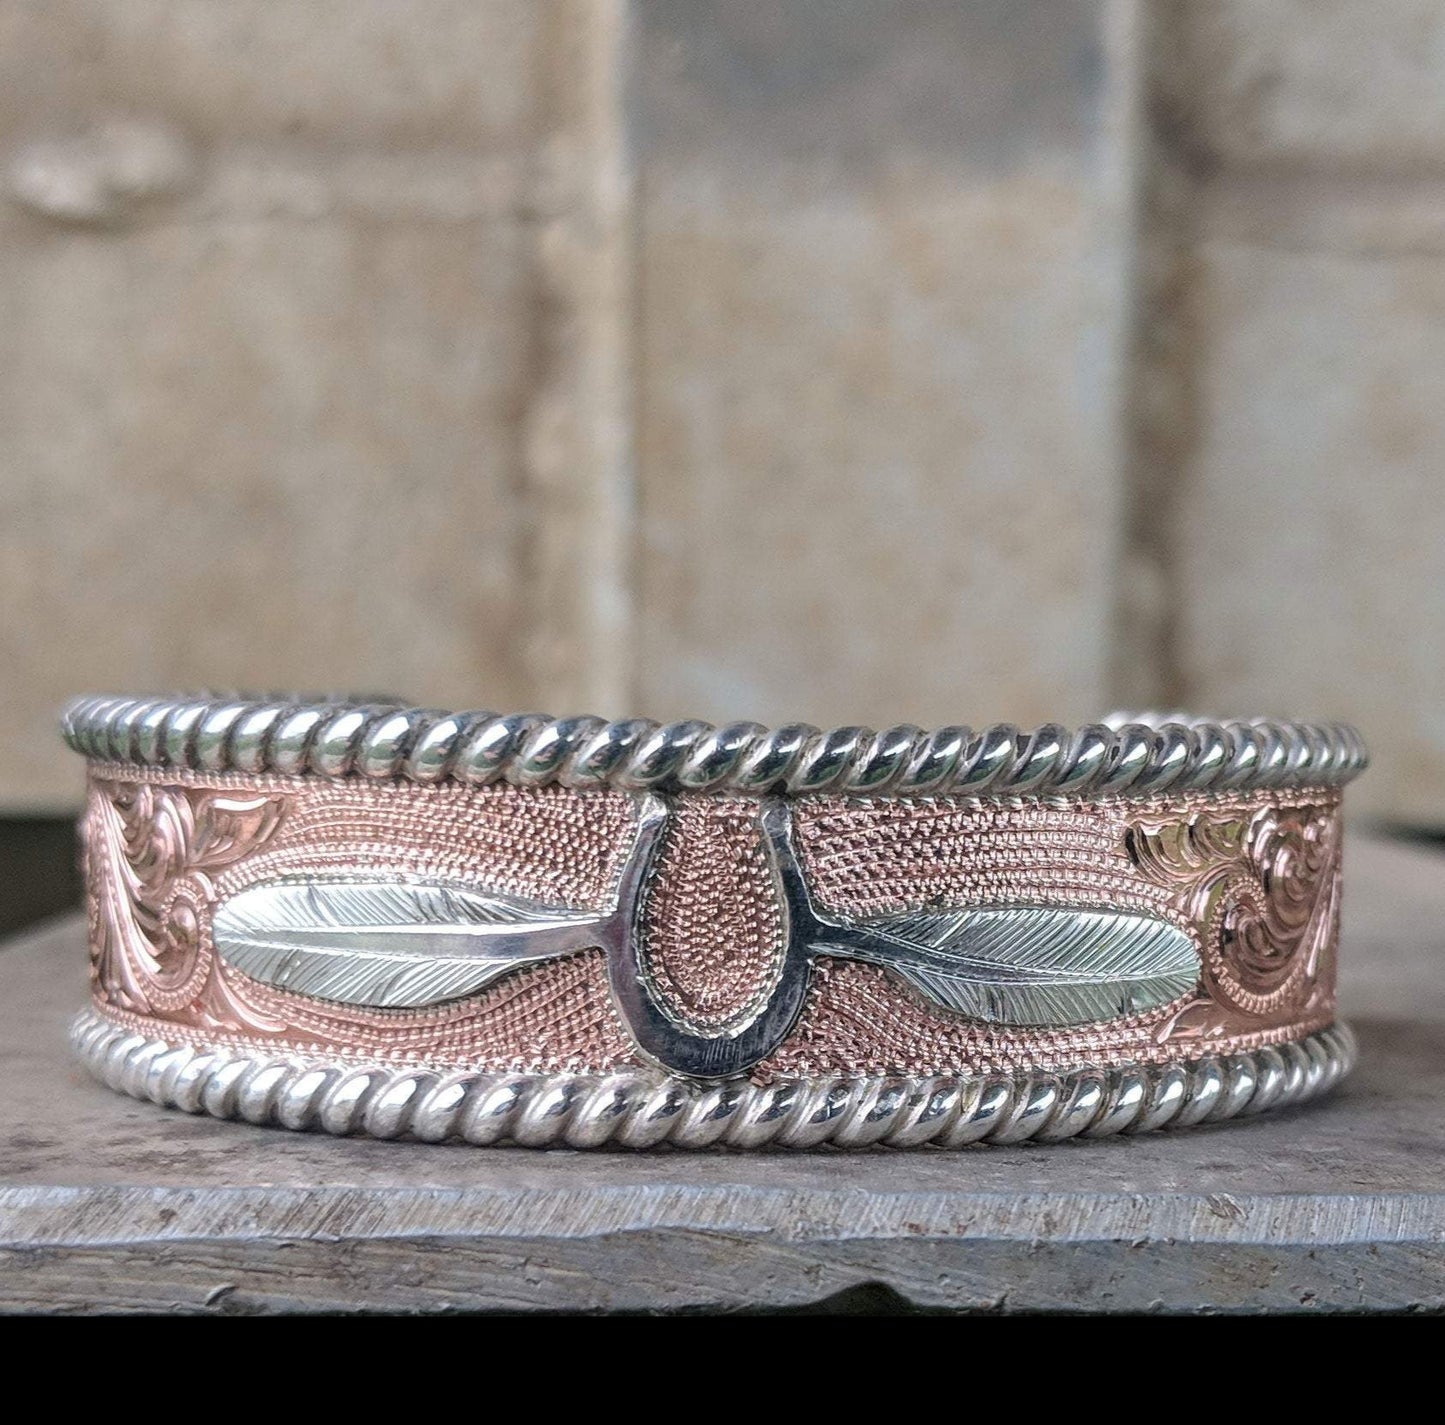 Sterling Silver, Copper Engraved Bracelet, Western Jewelry, For Her Design BRC00021 by Loreena Rose